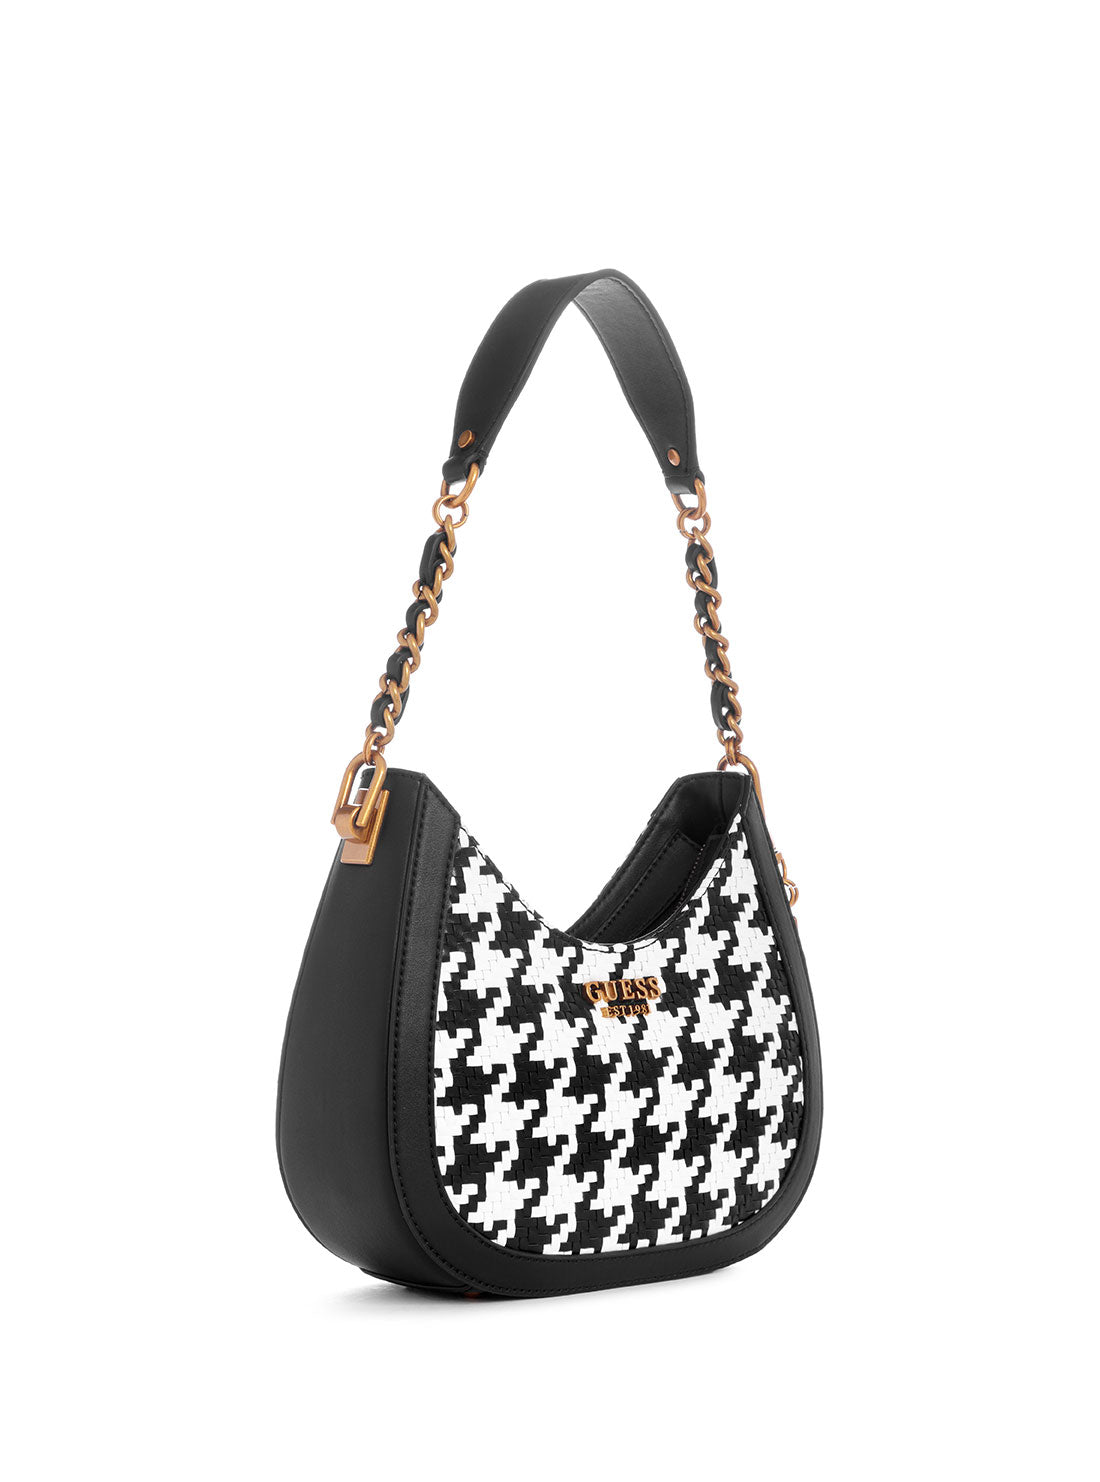 GUESS Women's Black White Abey Small Hobo Bag HT855801 Angle View